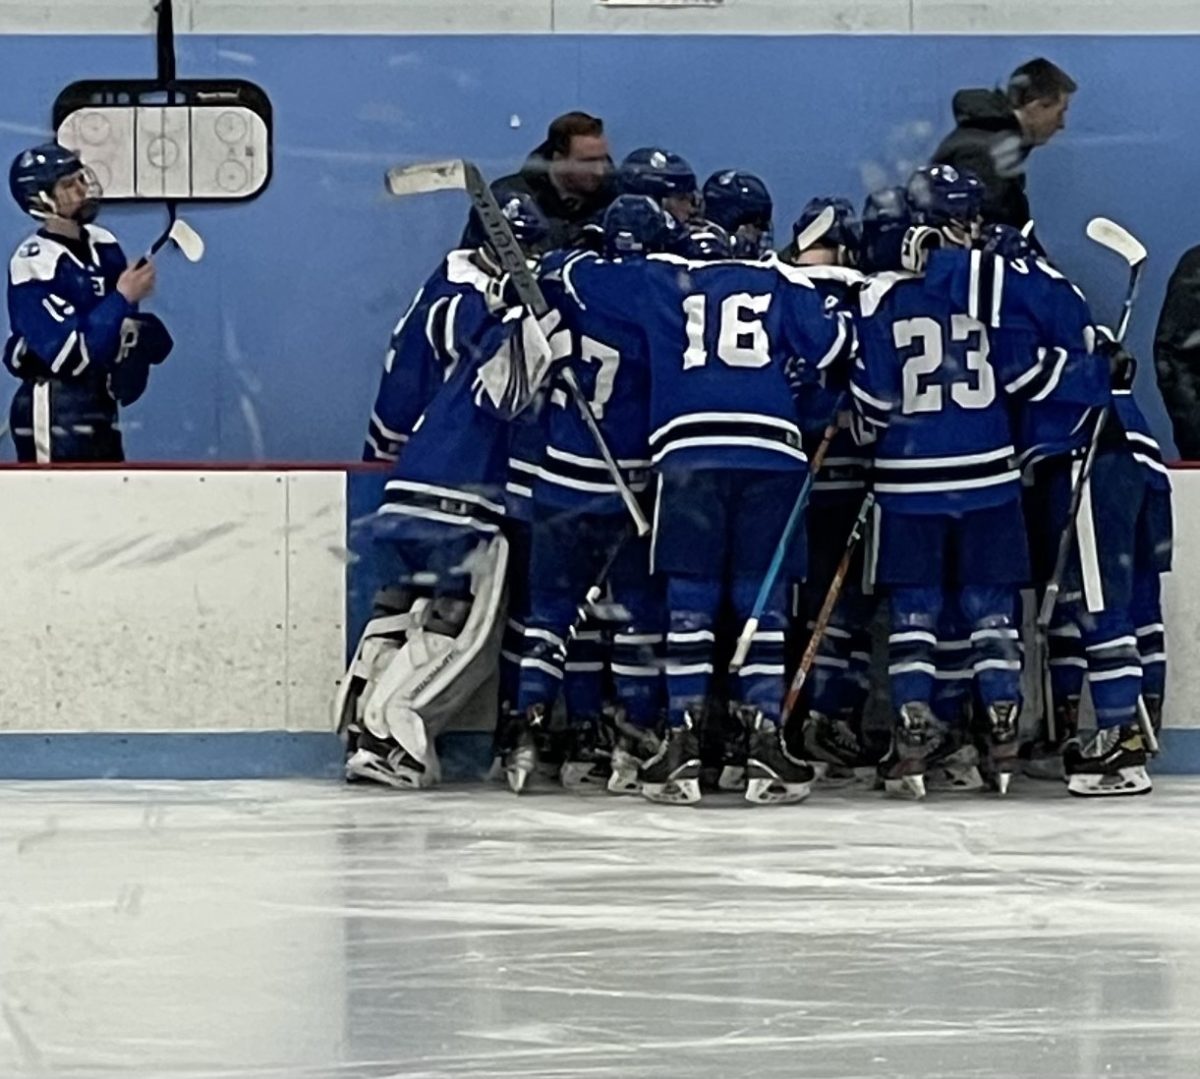 Scituate Sailors prepare to take on the Hanover Hawks tomorrow, January 6th at 5:10pm, at the Hobomock Arena in Pembroke.